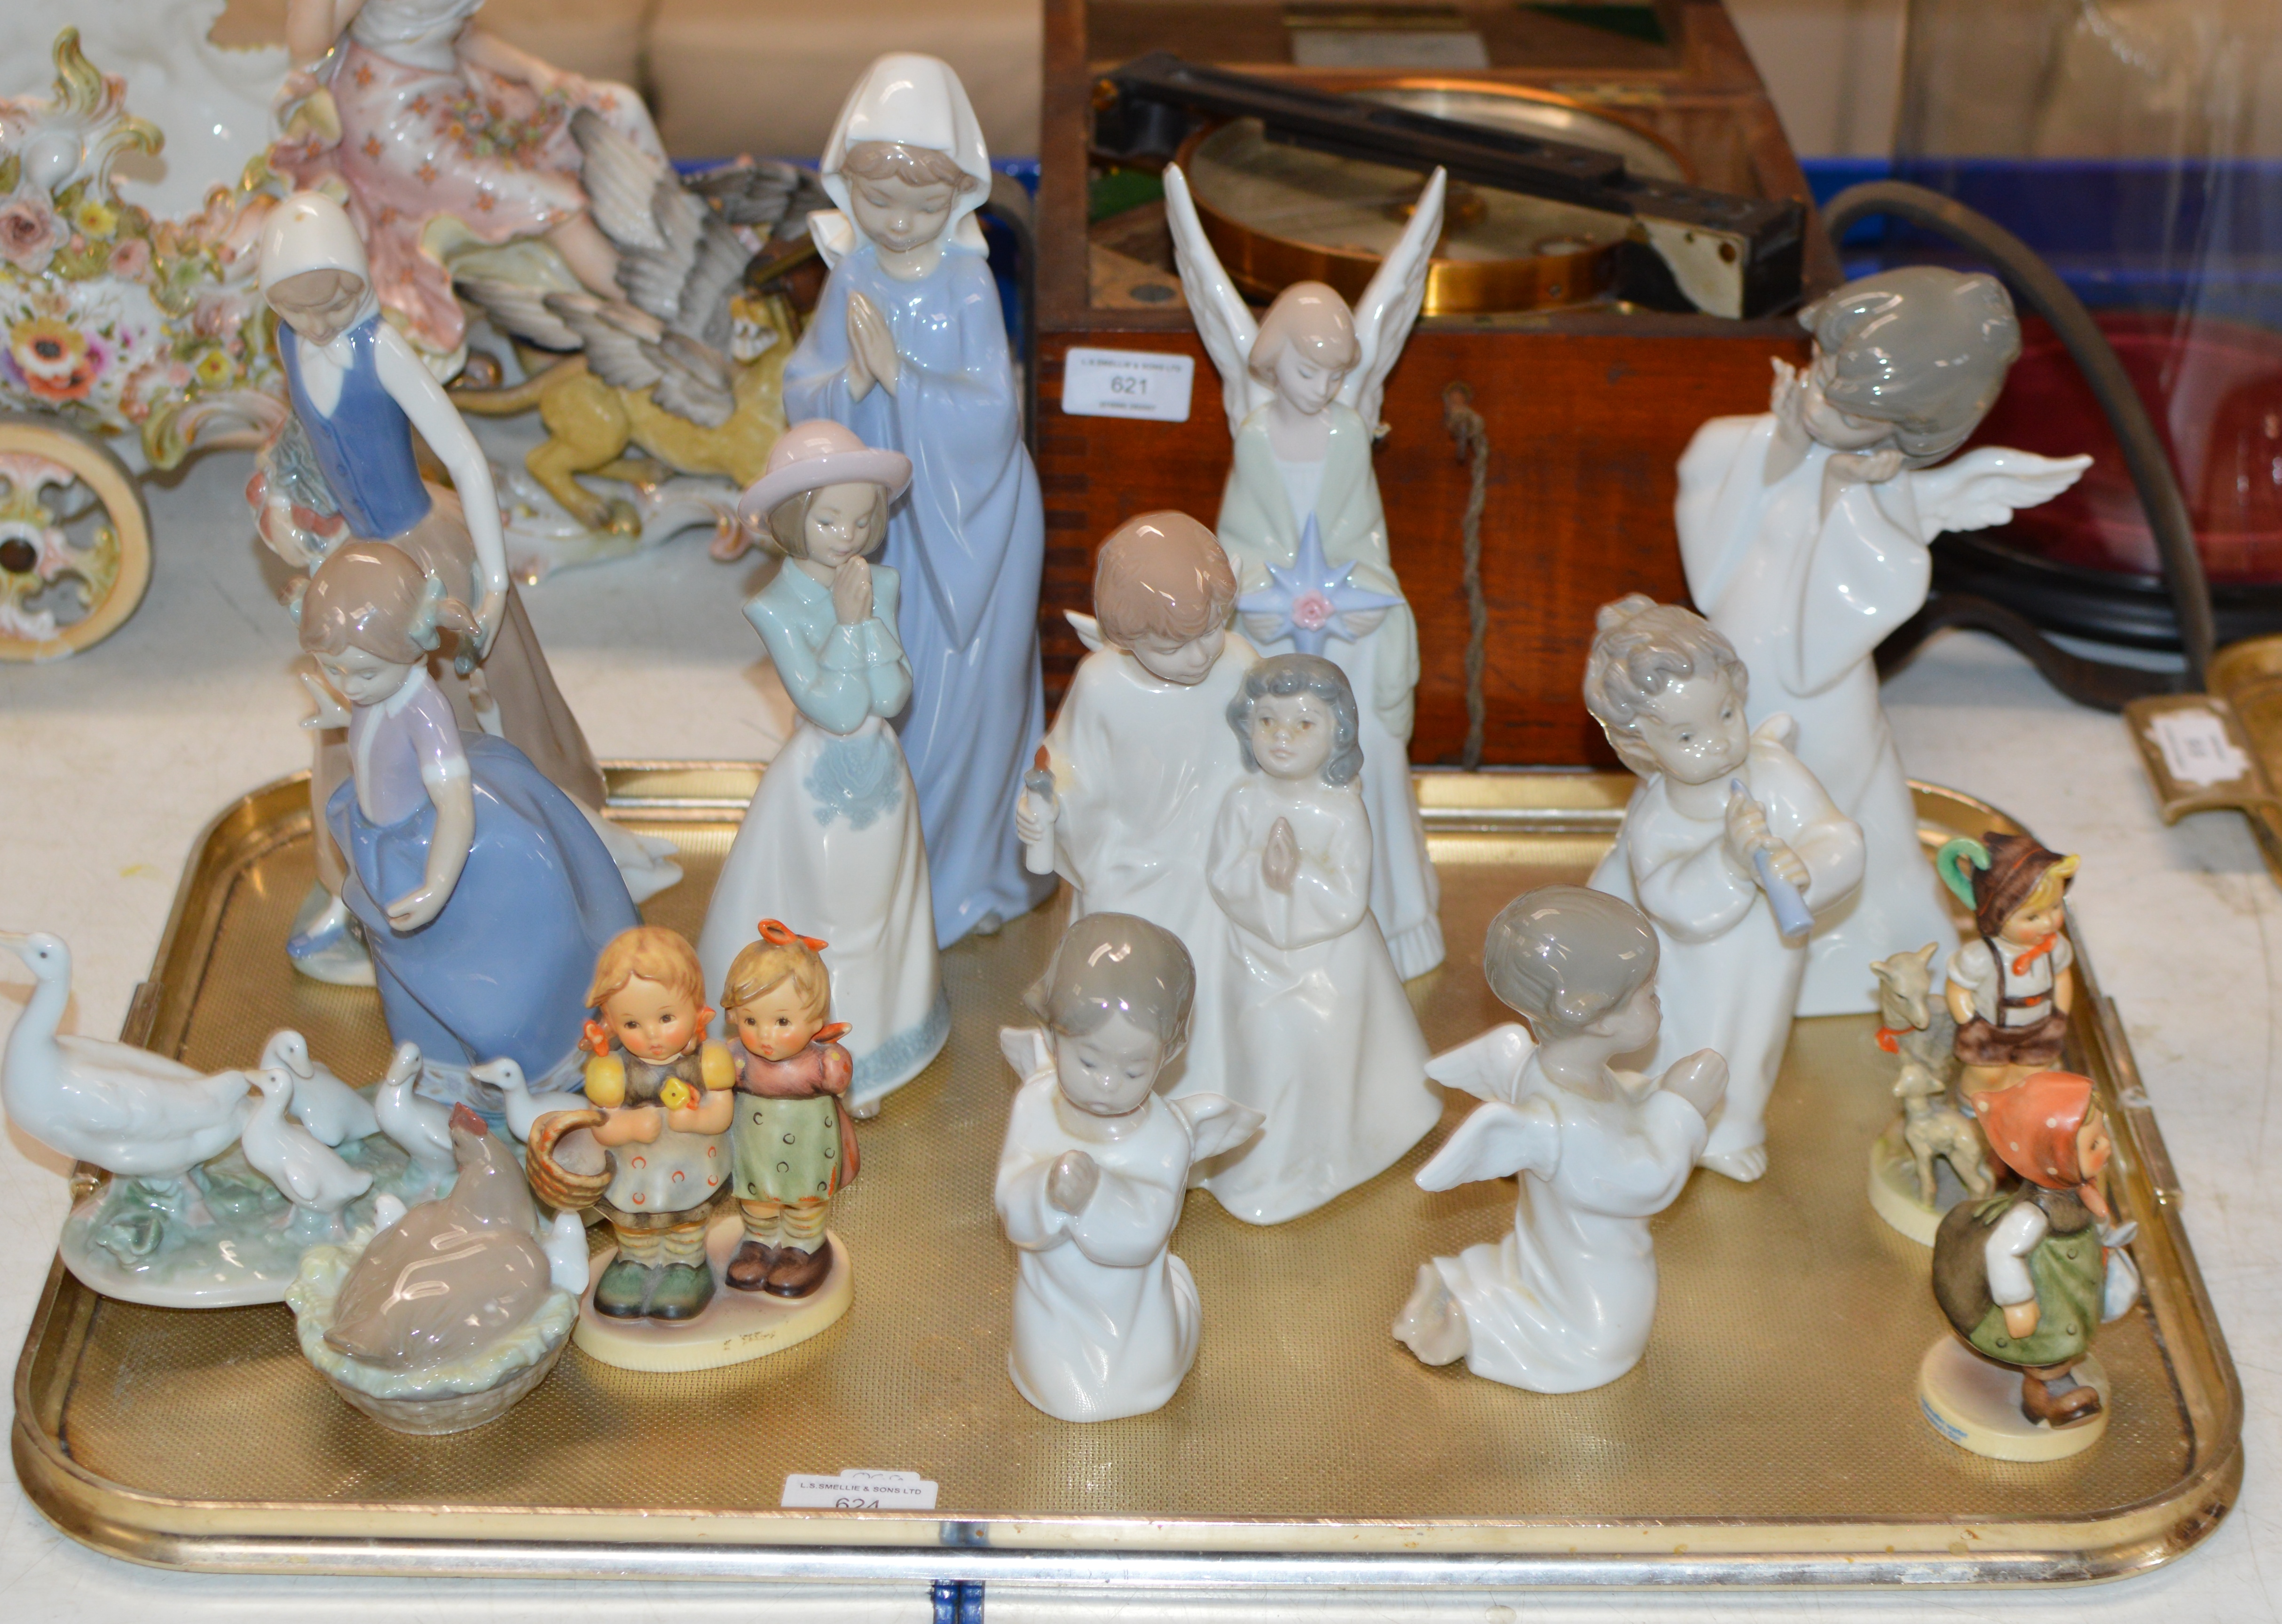 TRAY WITH VARIOUS FIGURINE ORNAMENTS, HUMMEL, LLADRO & NAO